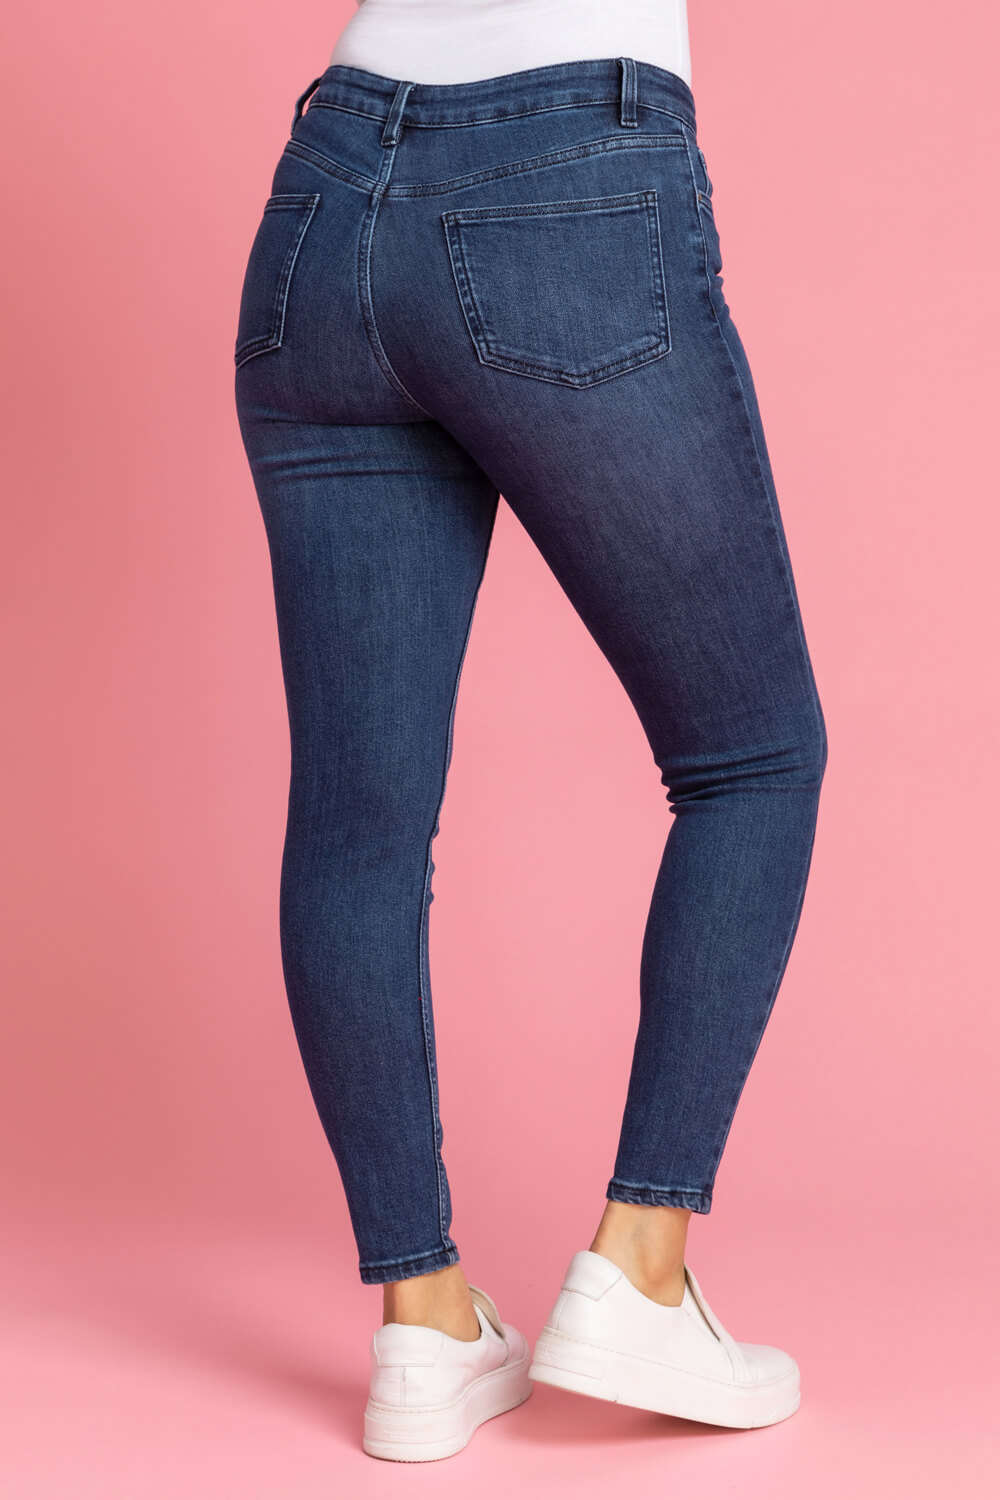 Blue 29" Stretch Skinny Jeans, Image 2 of 4